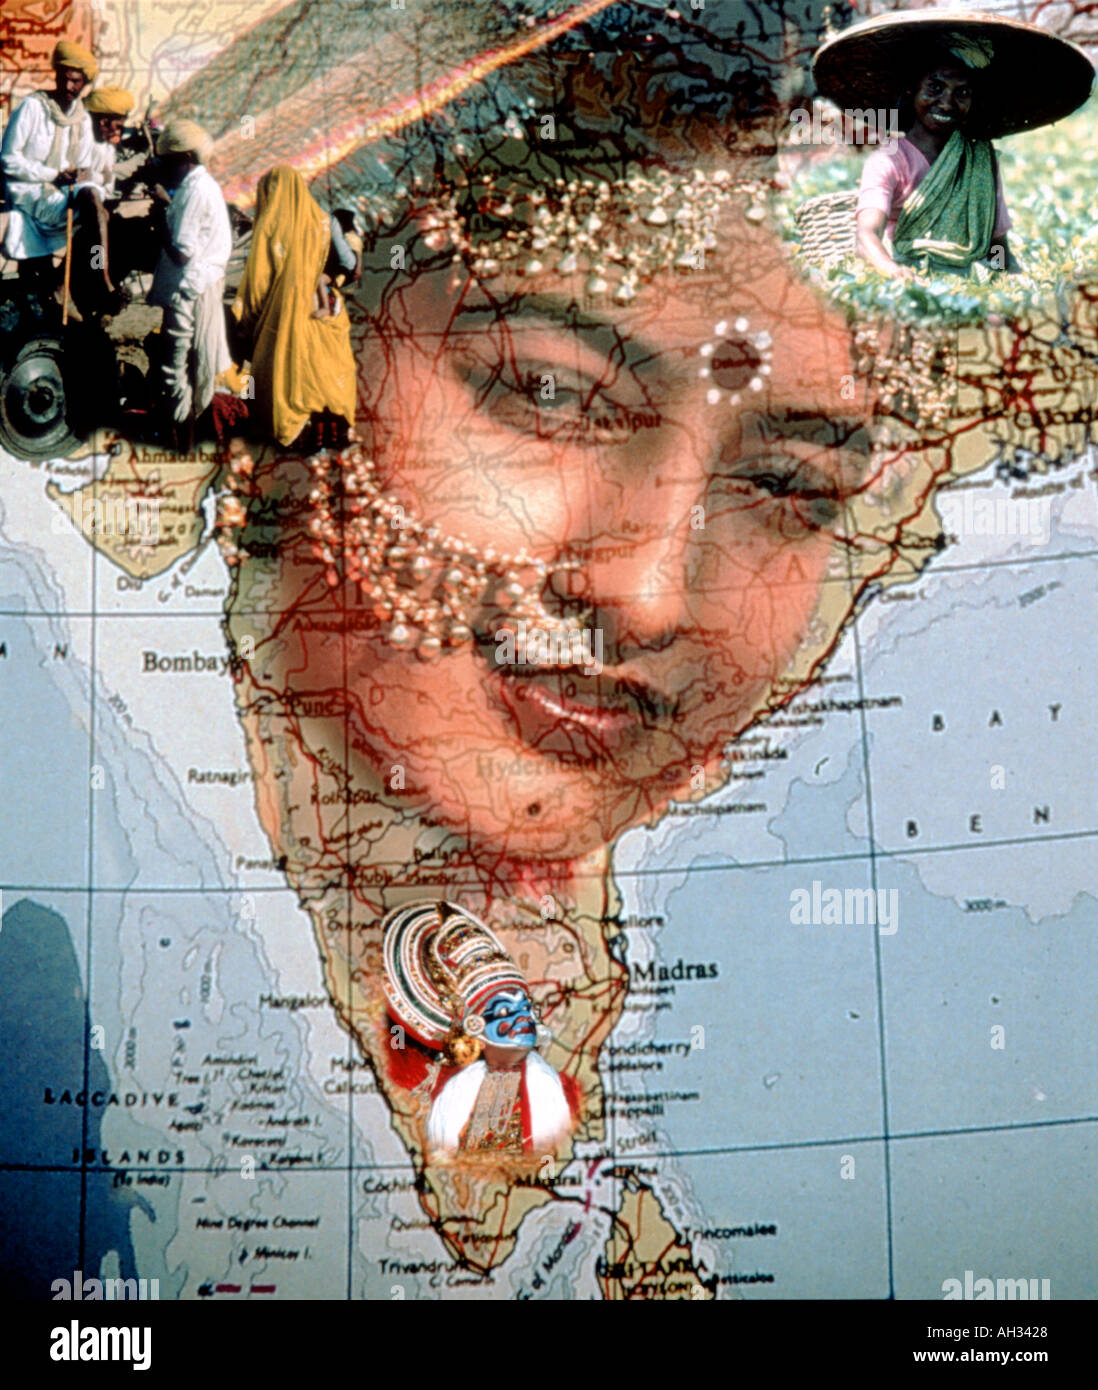 ' The Face of India 'Composite image map of India superimposed with cultural regional aspects Stock Photo